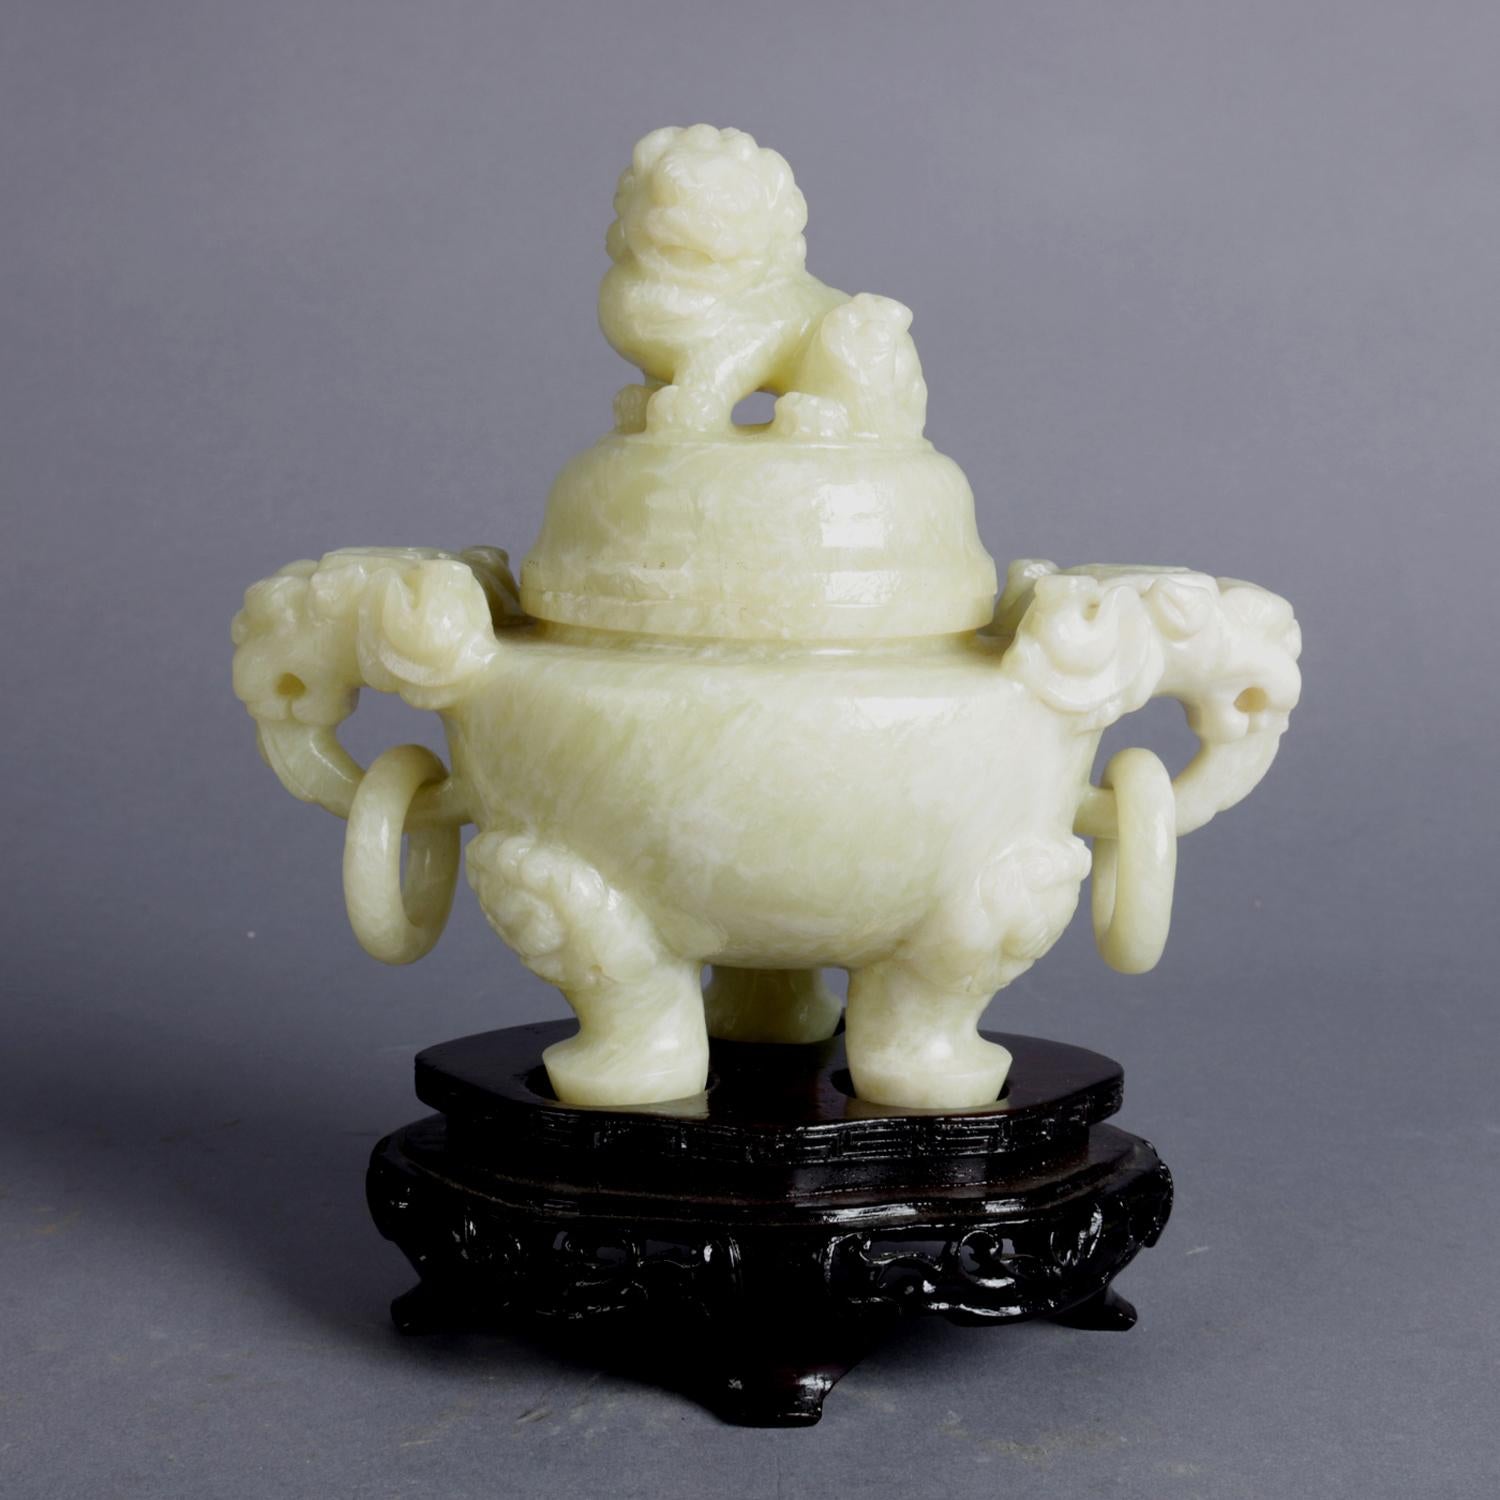 Asian figural censer features cave soapstone construction having lid with foo dog finial and double elephant handled bowl raised on elephant legs, seated on carved hardwood display Stand, 20th century.

Measures: 7.75